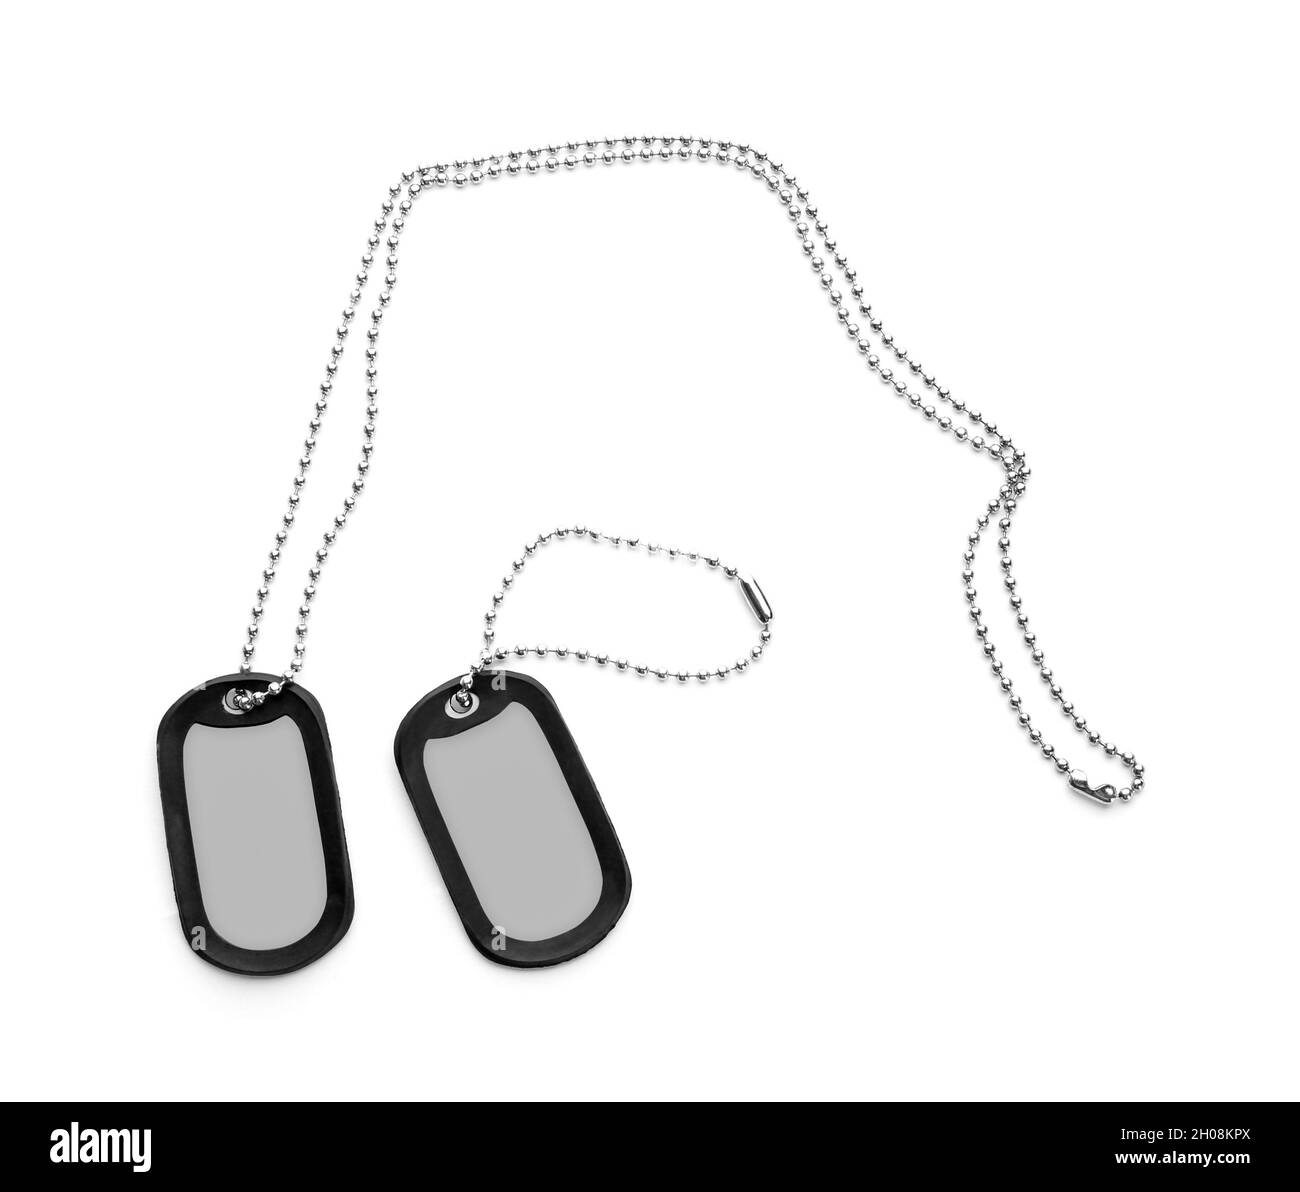 Military ID tags on white background Stock Photo - Alamy